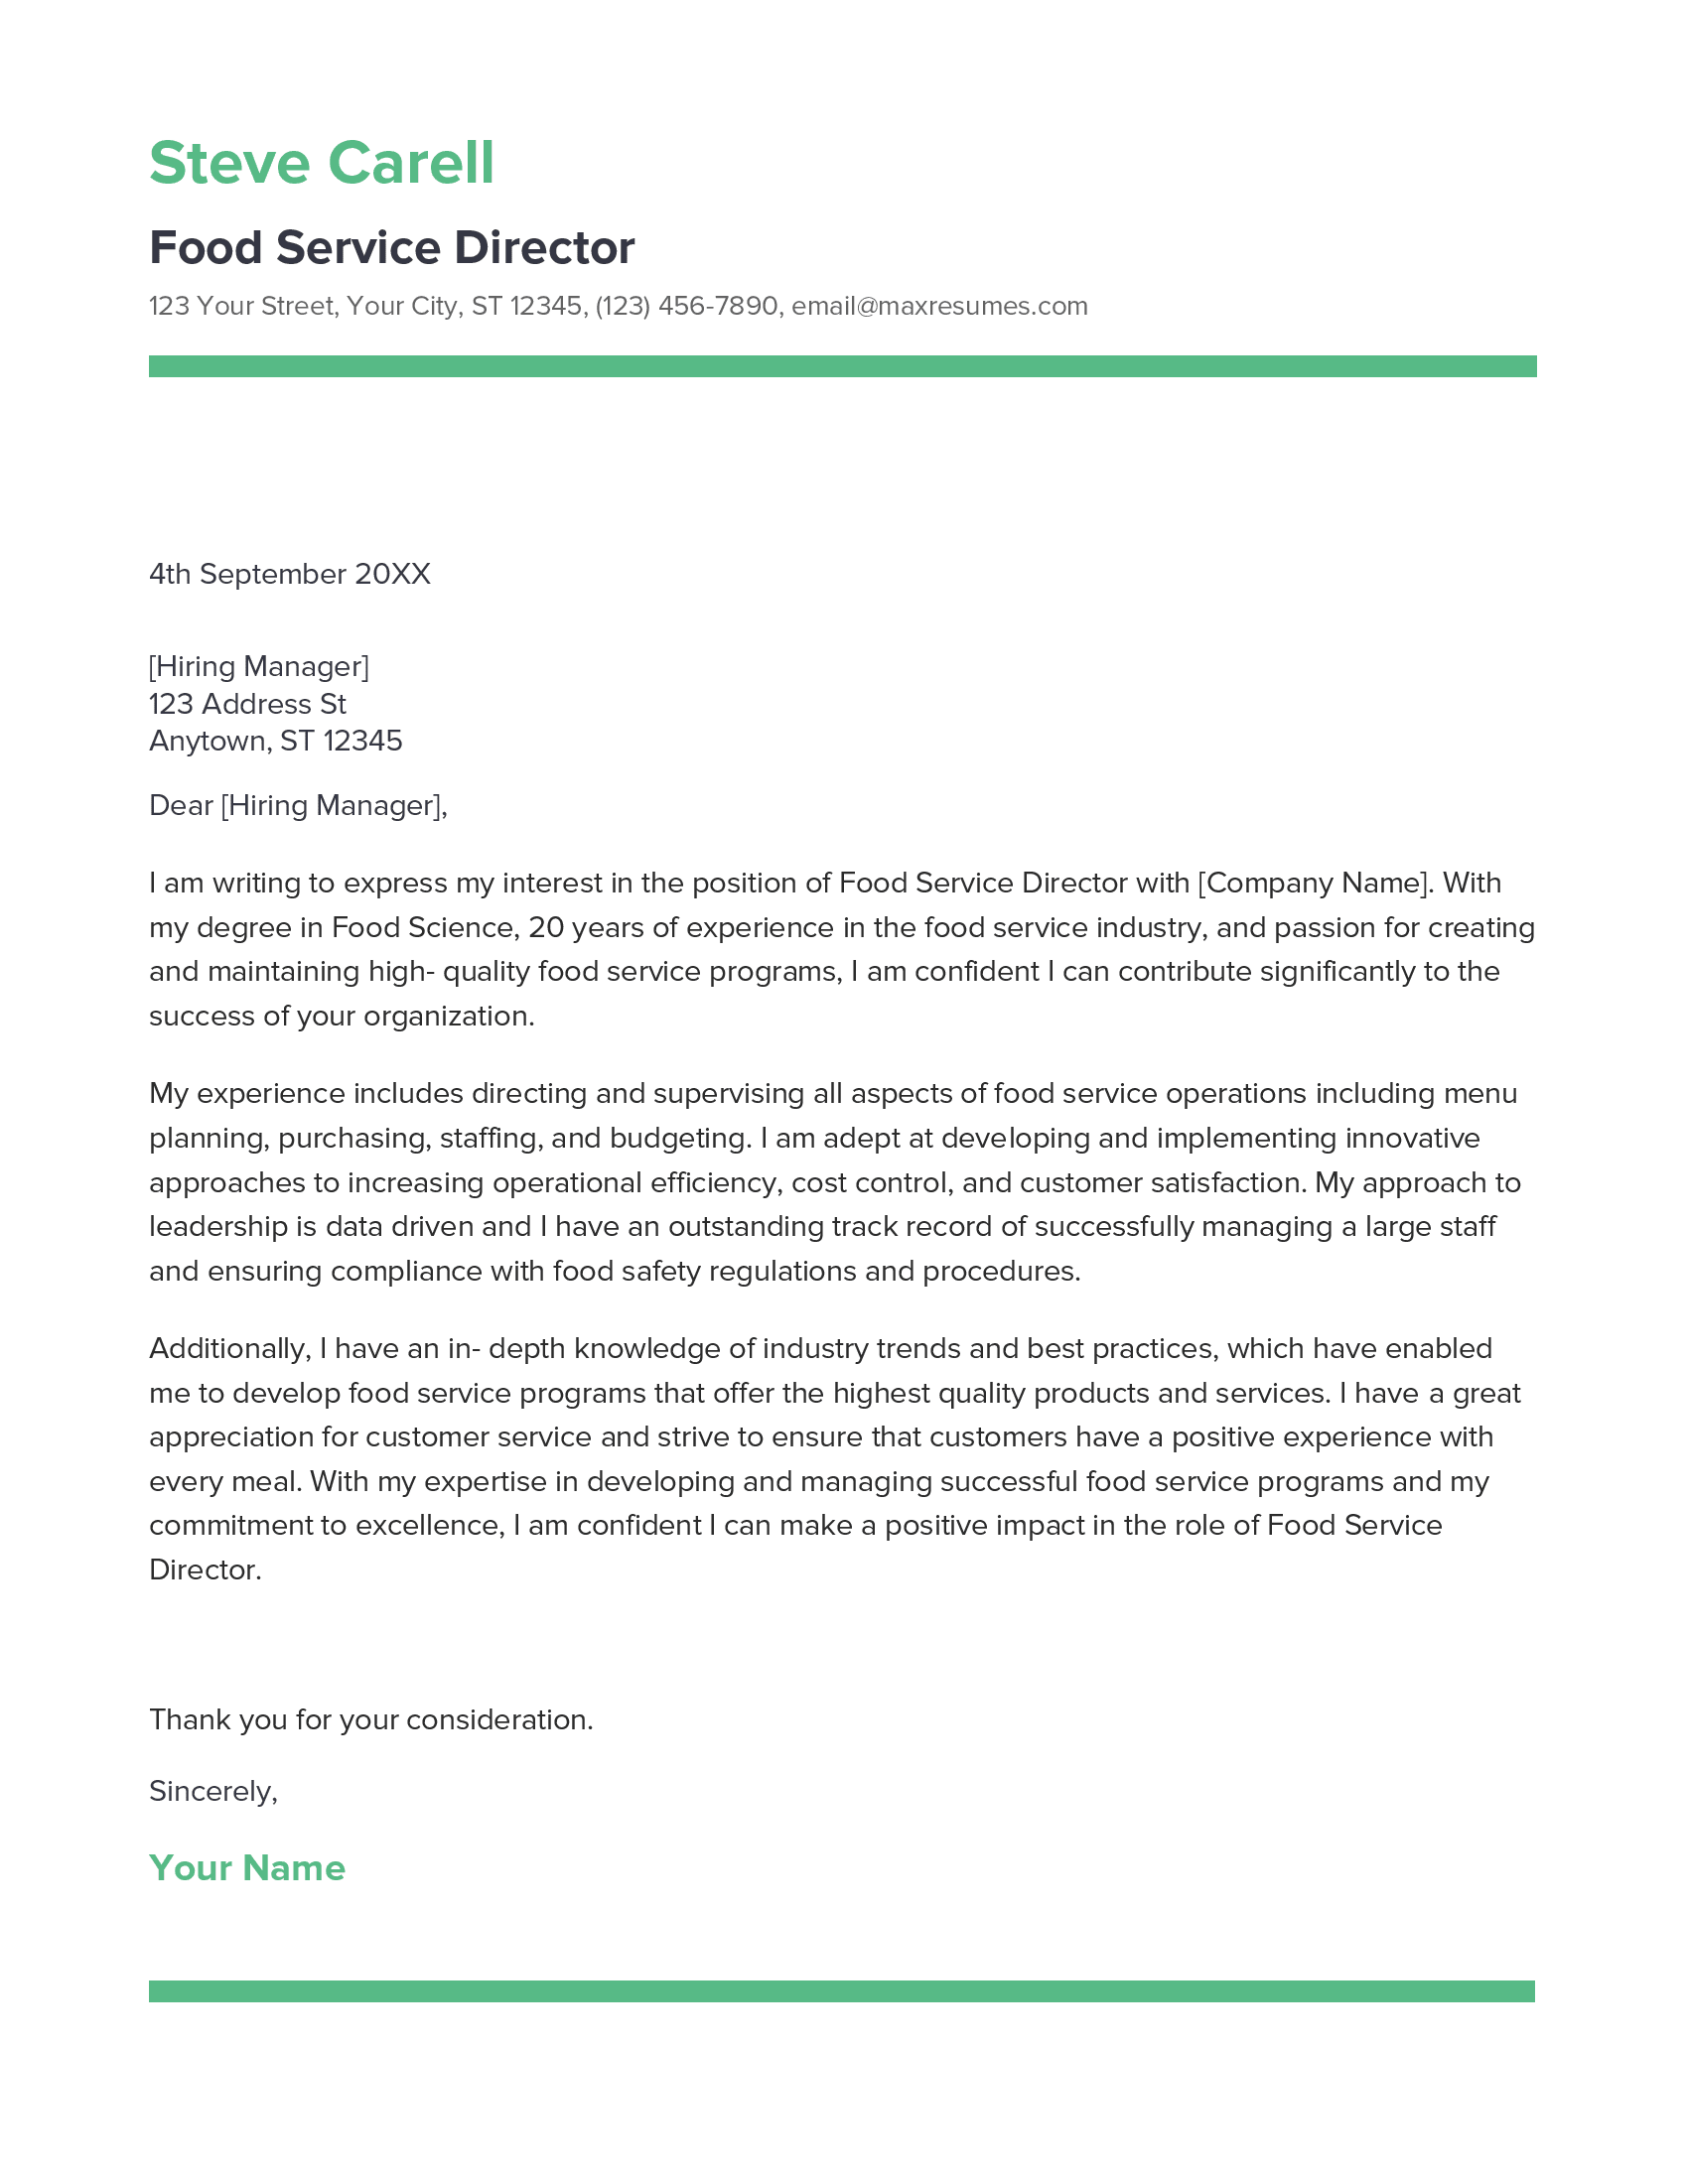 Food Service Director Cover Letter Example